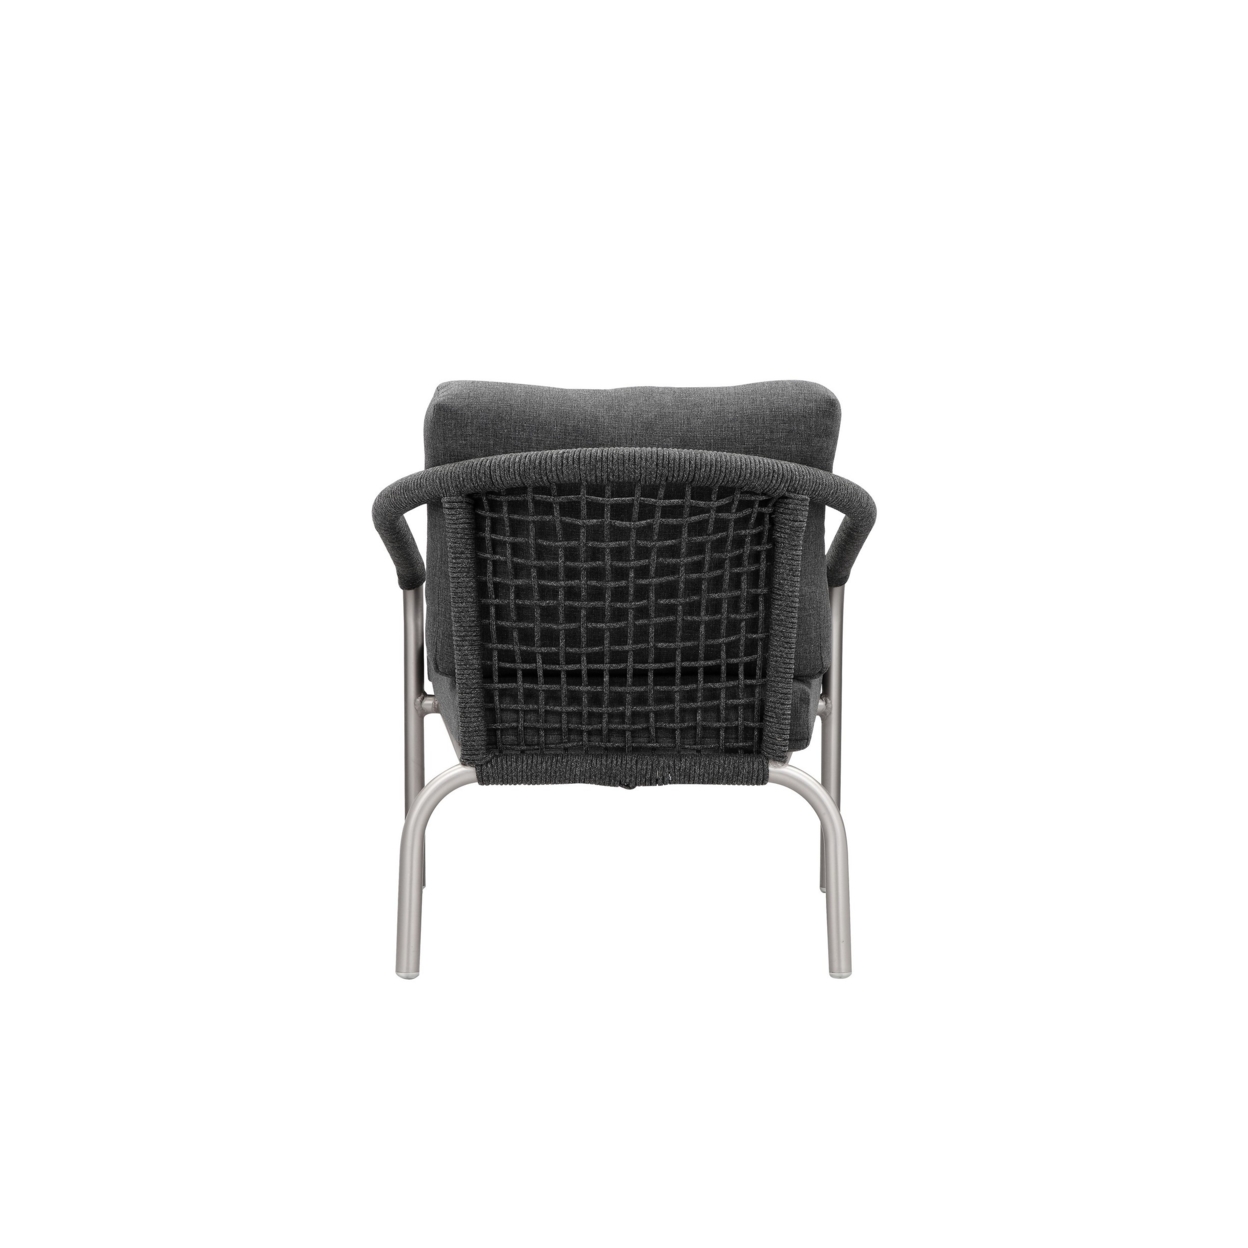 Phil 32 Inch Armchair, Slate Gray Rope Accent, Fade Resistant Cushions- Saltoro Sherpi